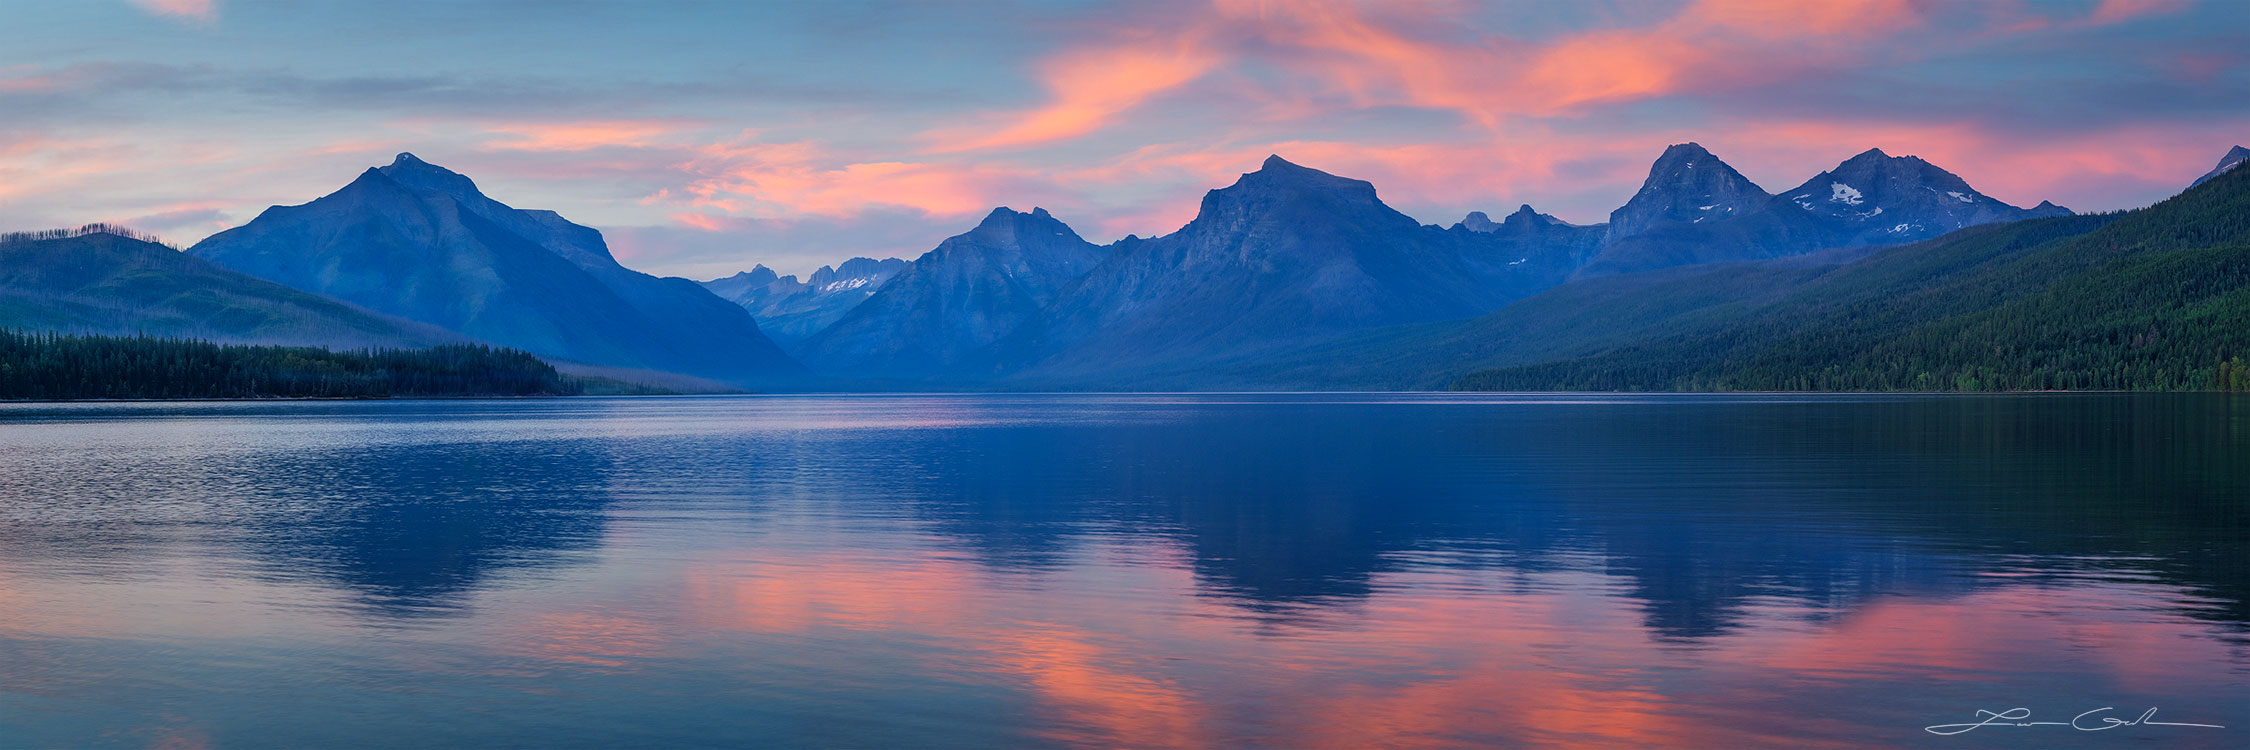 A panorama of a big mountain lake and lots of mountains in the distance, reflecting in the water at sunset with some pink and orange clouds - Glacier National Park, Montana - Gintchin Fine Art